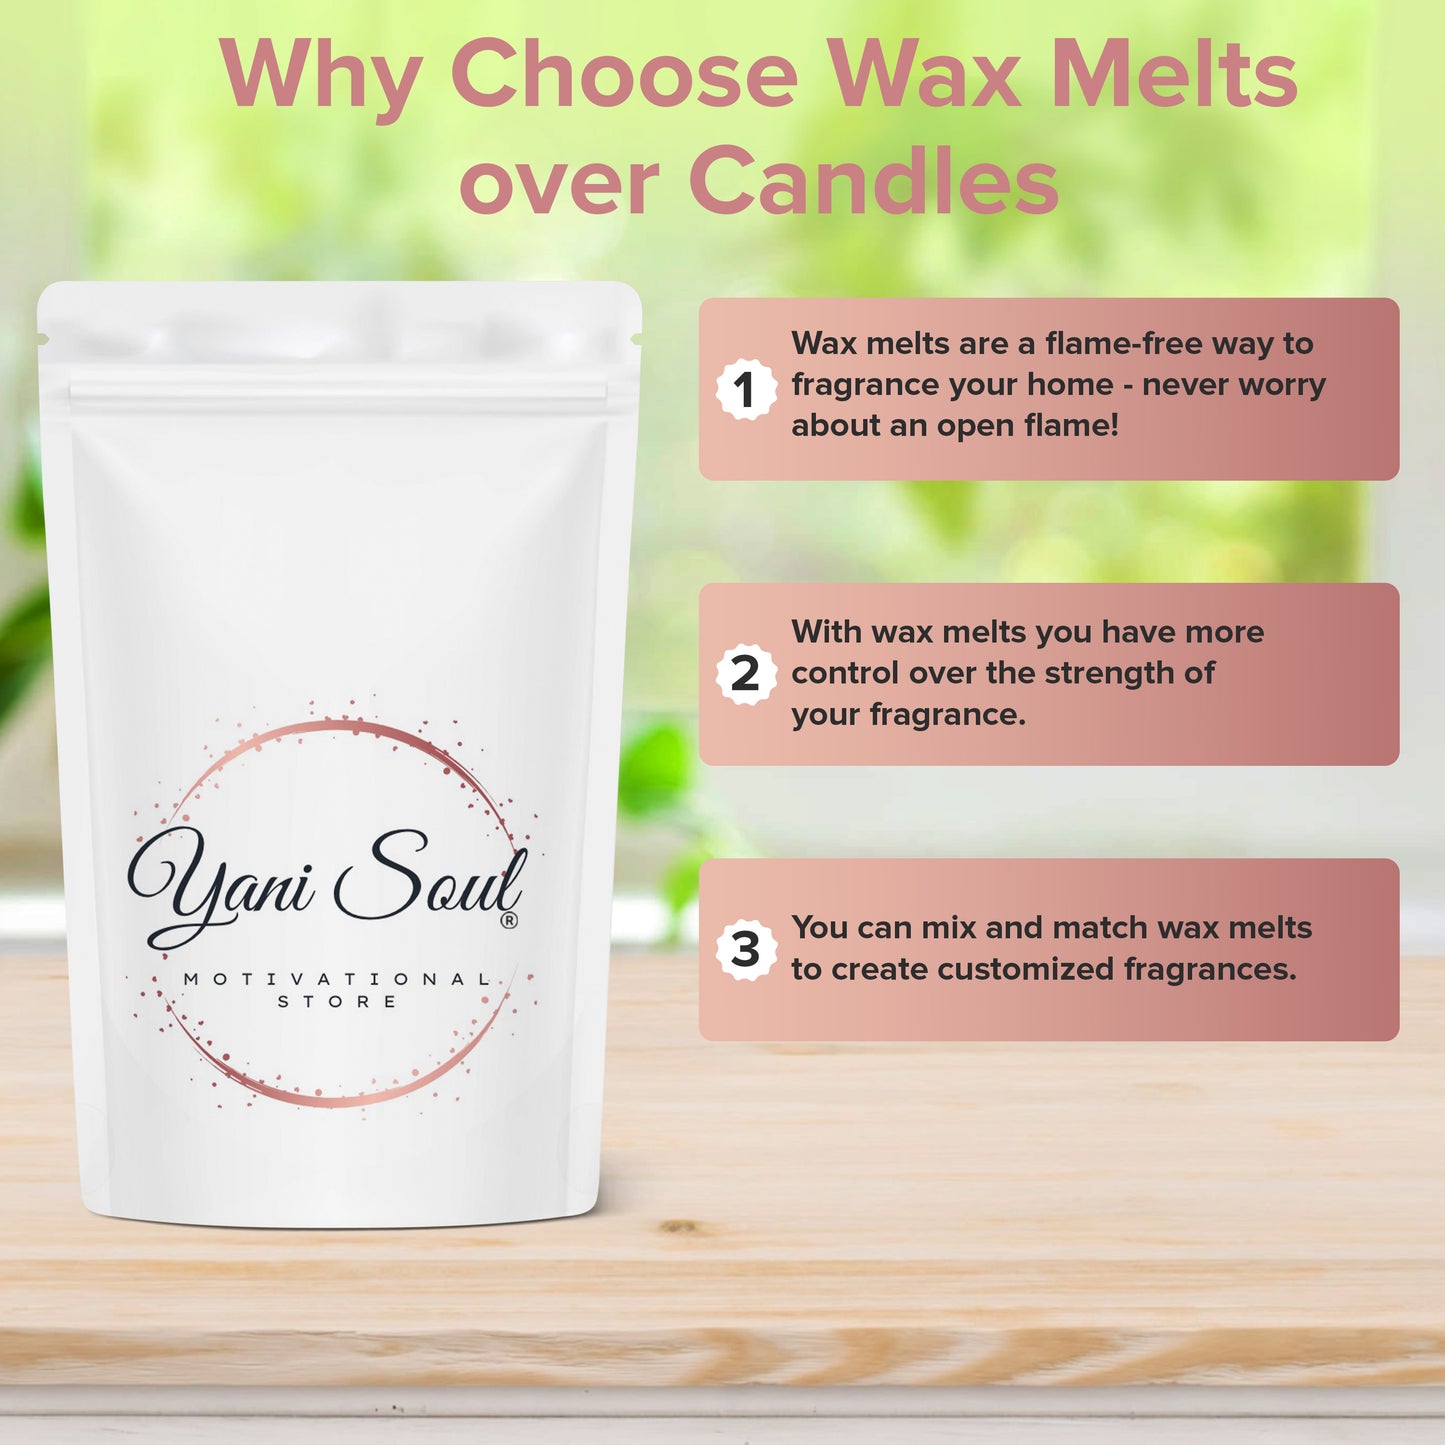 Scented Natural Soy Wax Melts – 8 Oz. of Scented Wax Melts.